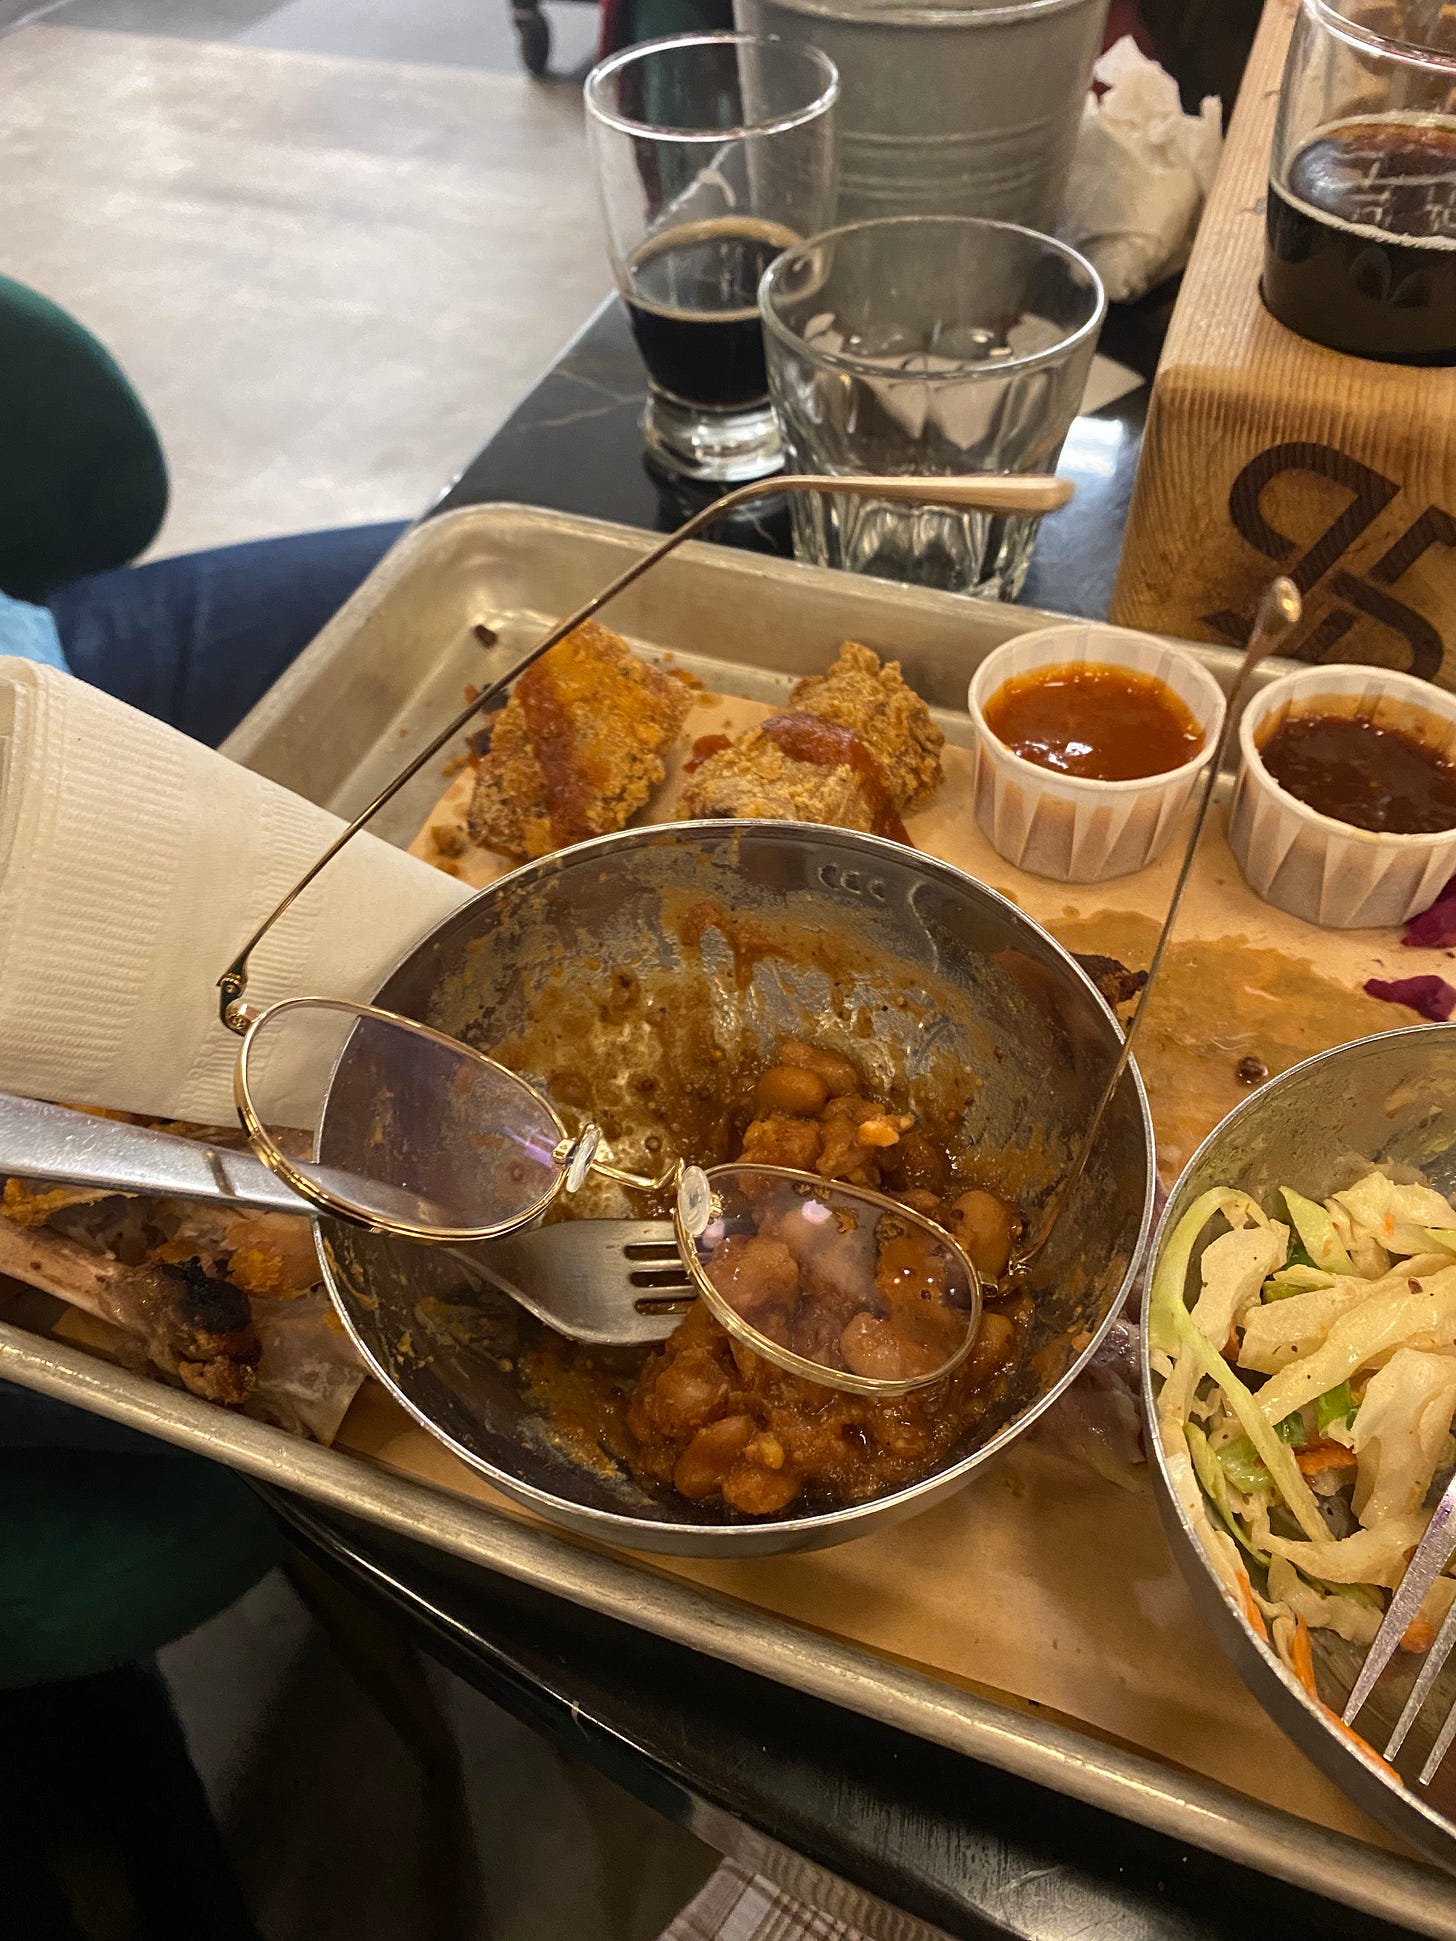 A metal plate of barbecue, partially eaten, with sides in metal bowls and sauces in paper cups. A pair of gold-rimmed glasses have fallen into a bowl of beans. The arms of the glasses stick out and one lens is resting on top of the fork.